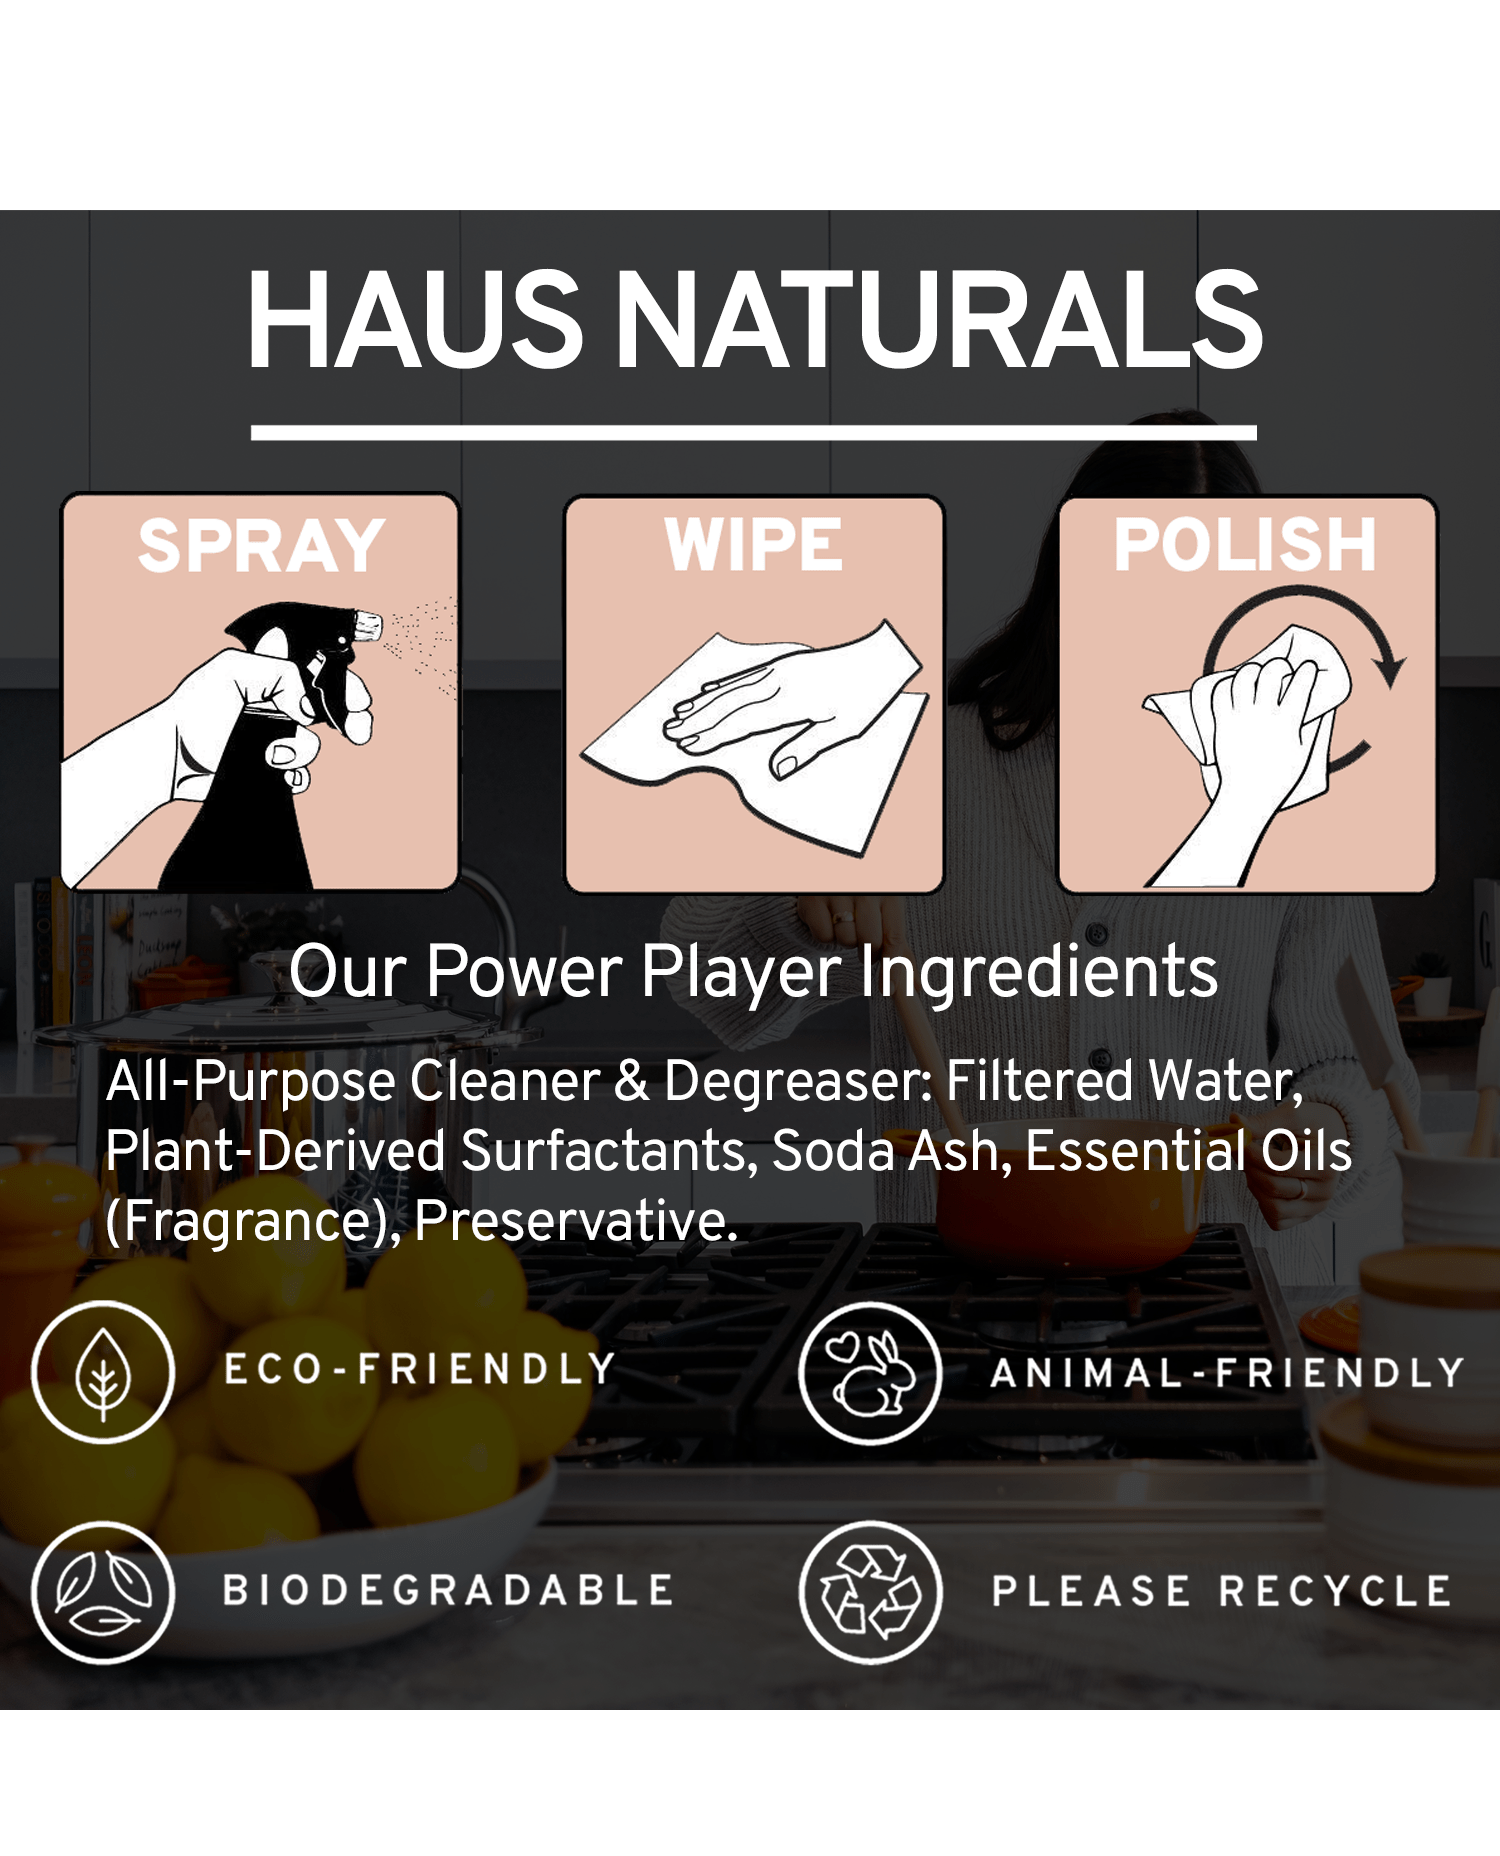 Haus Naturals Multi-Surface Cleaner Ingredients